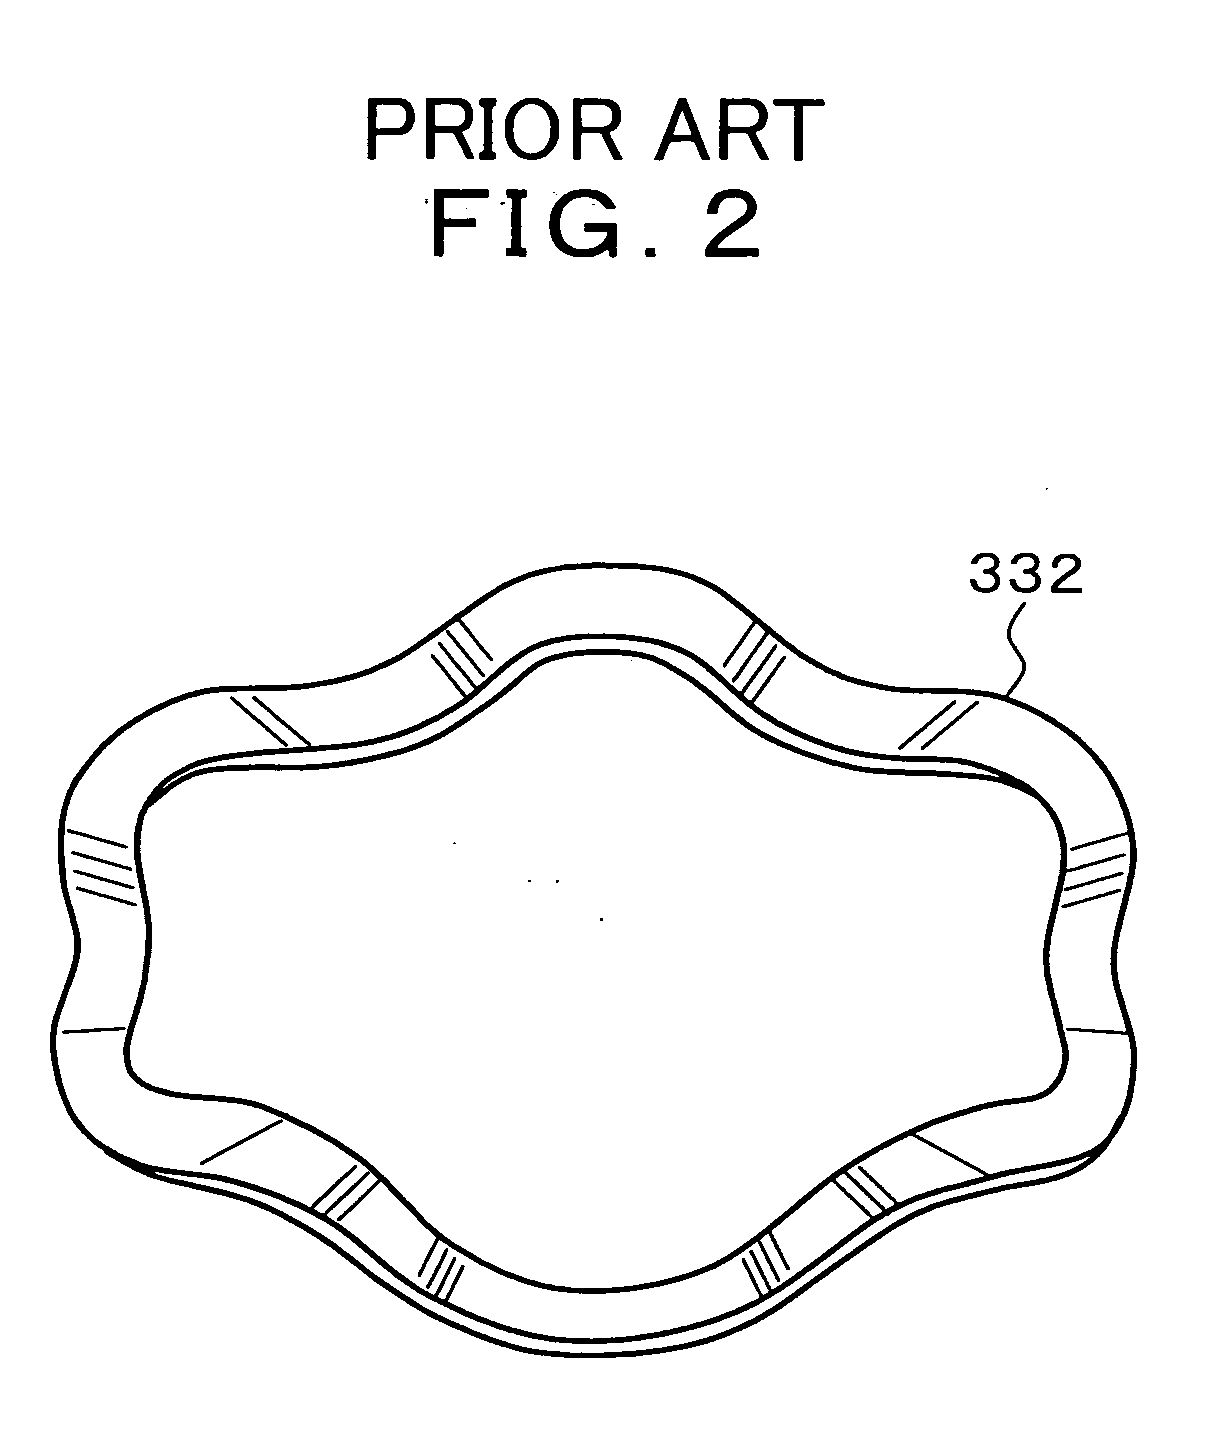 Driving force transmitting device for four-wheel drive vehicle